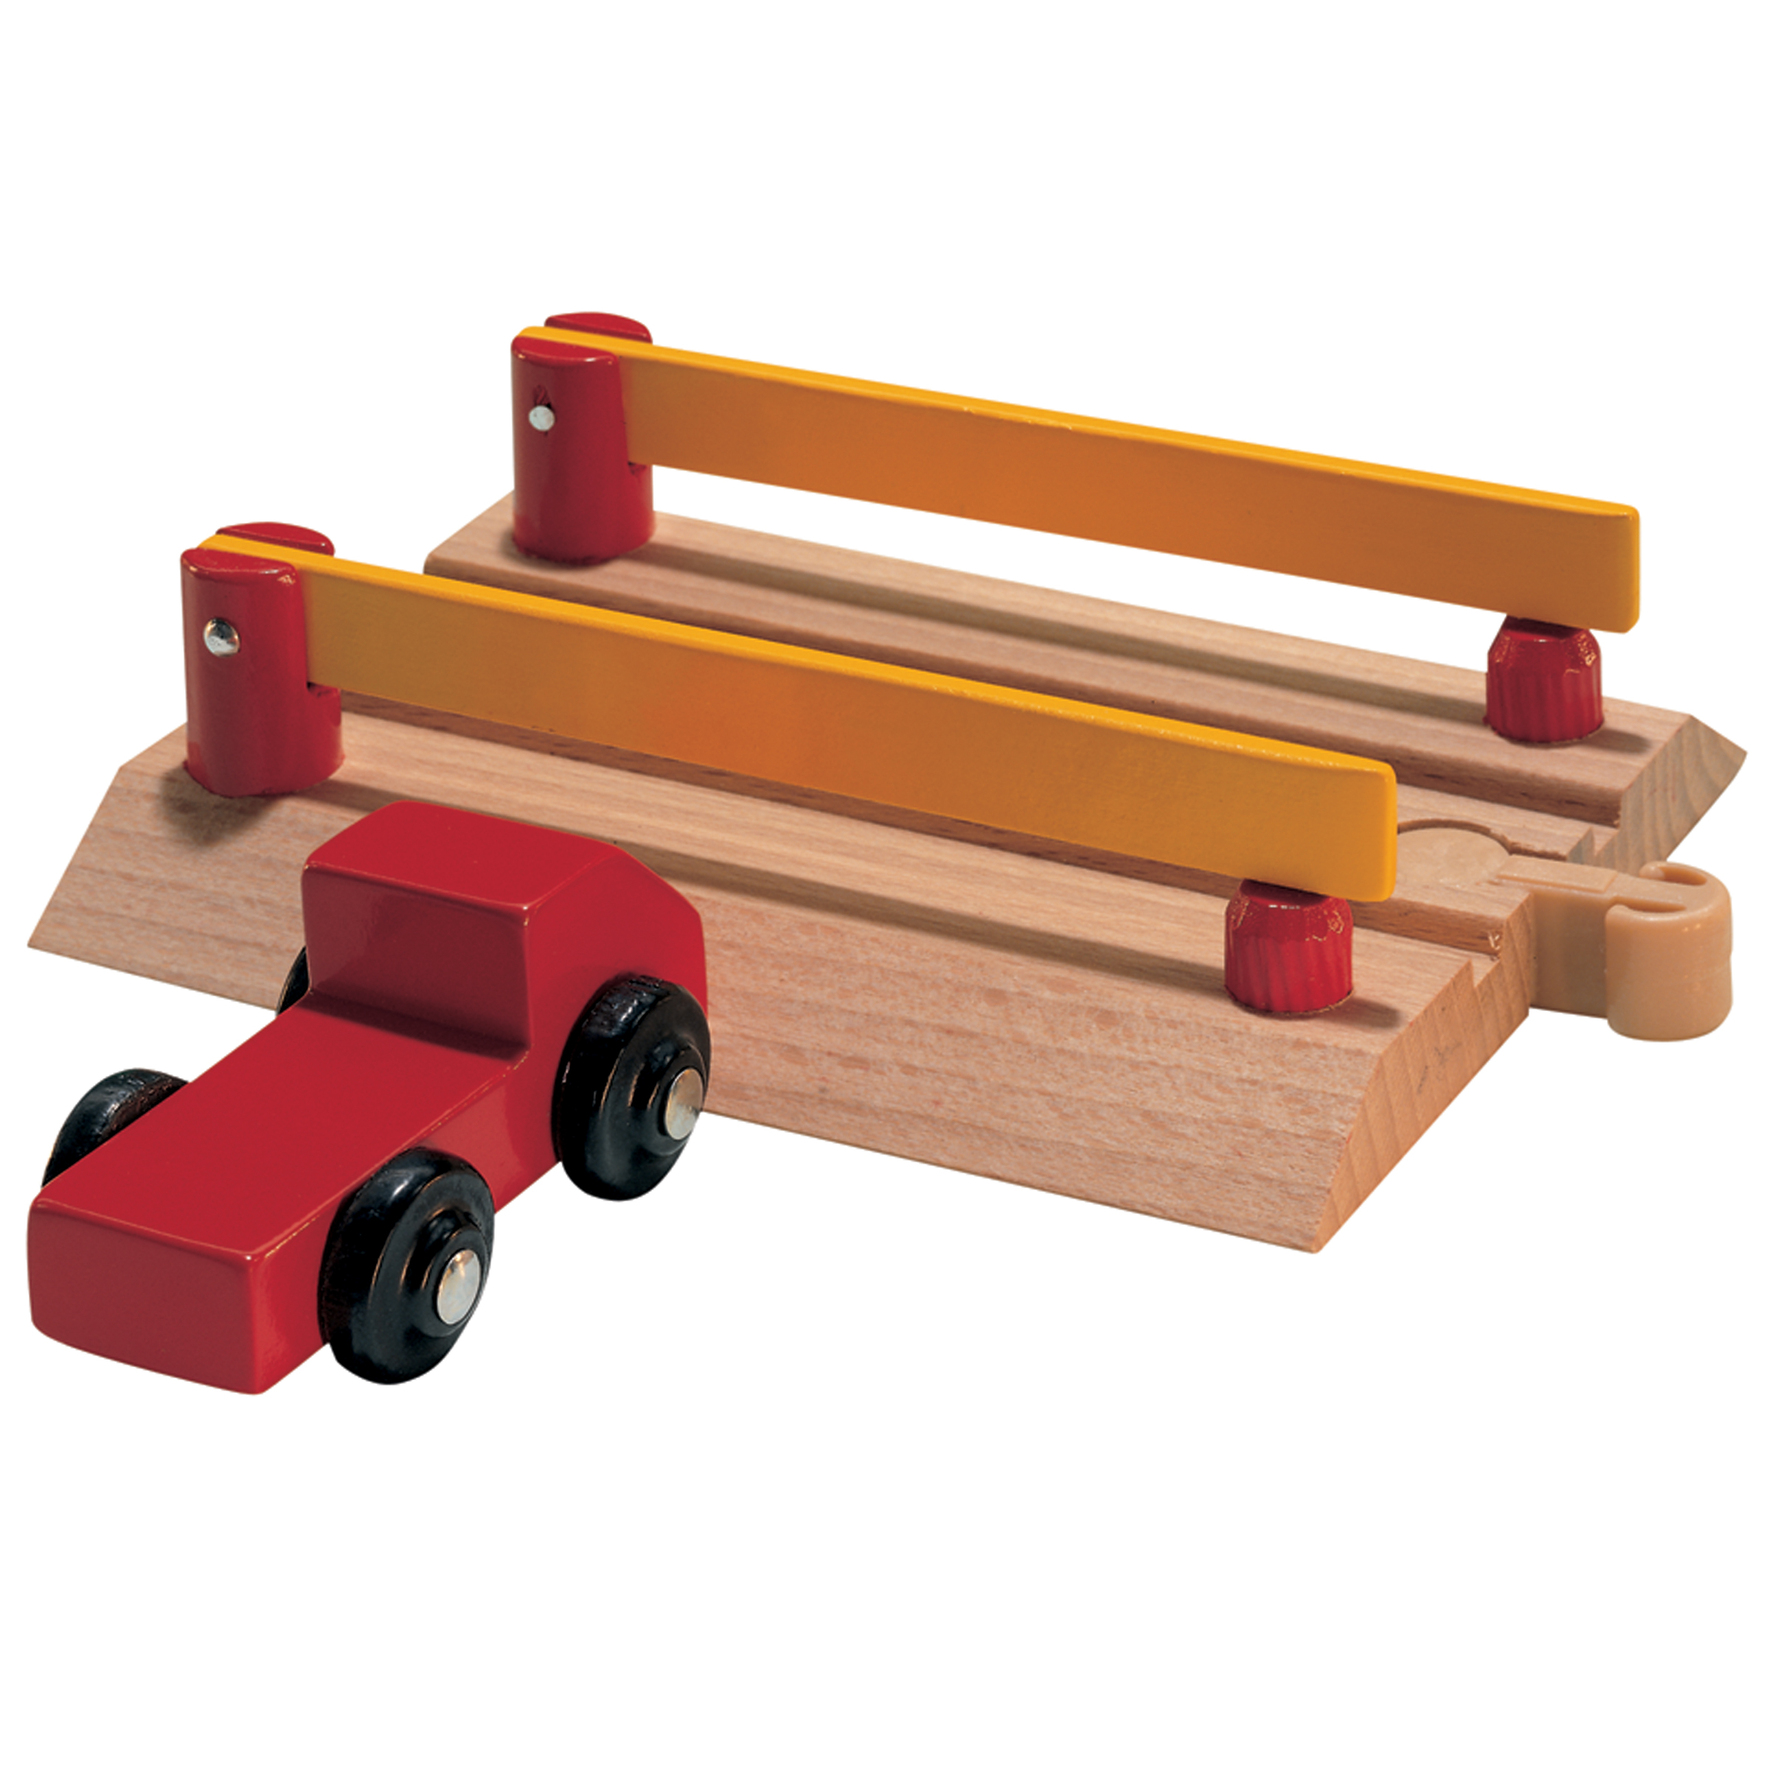 Wooden toys micki train set train set barrier and car wooden